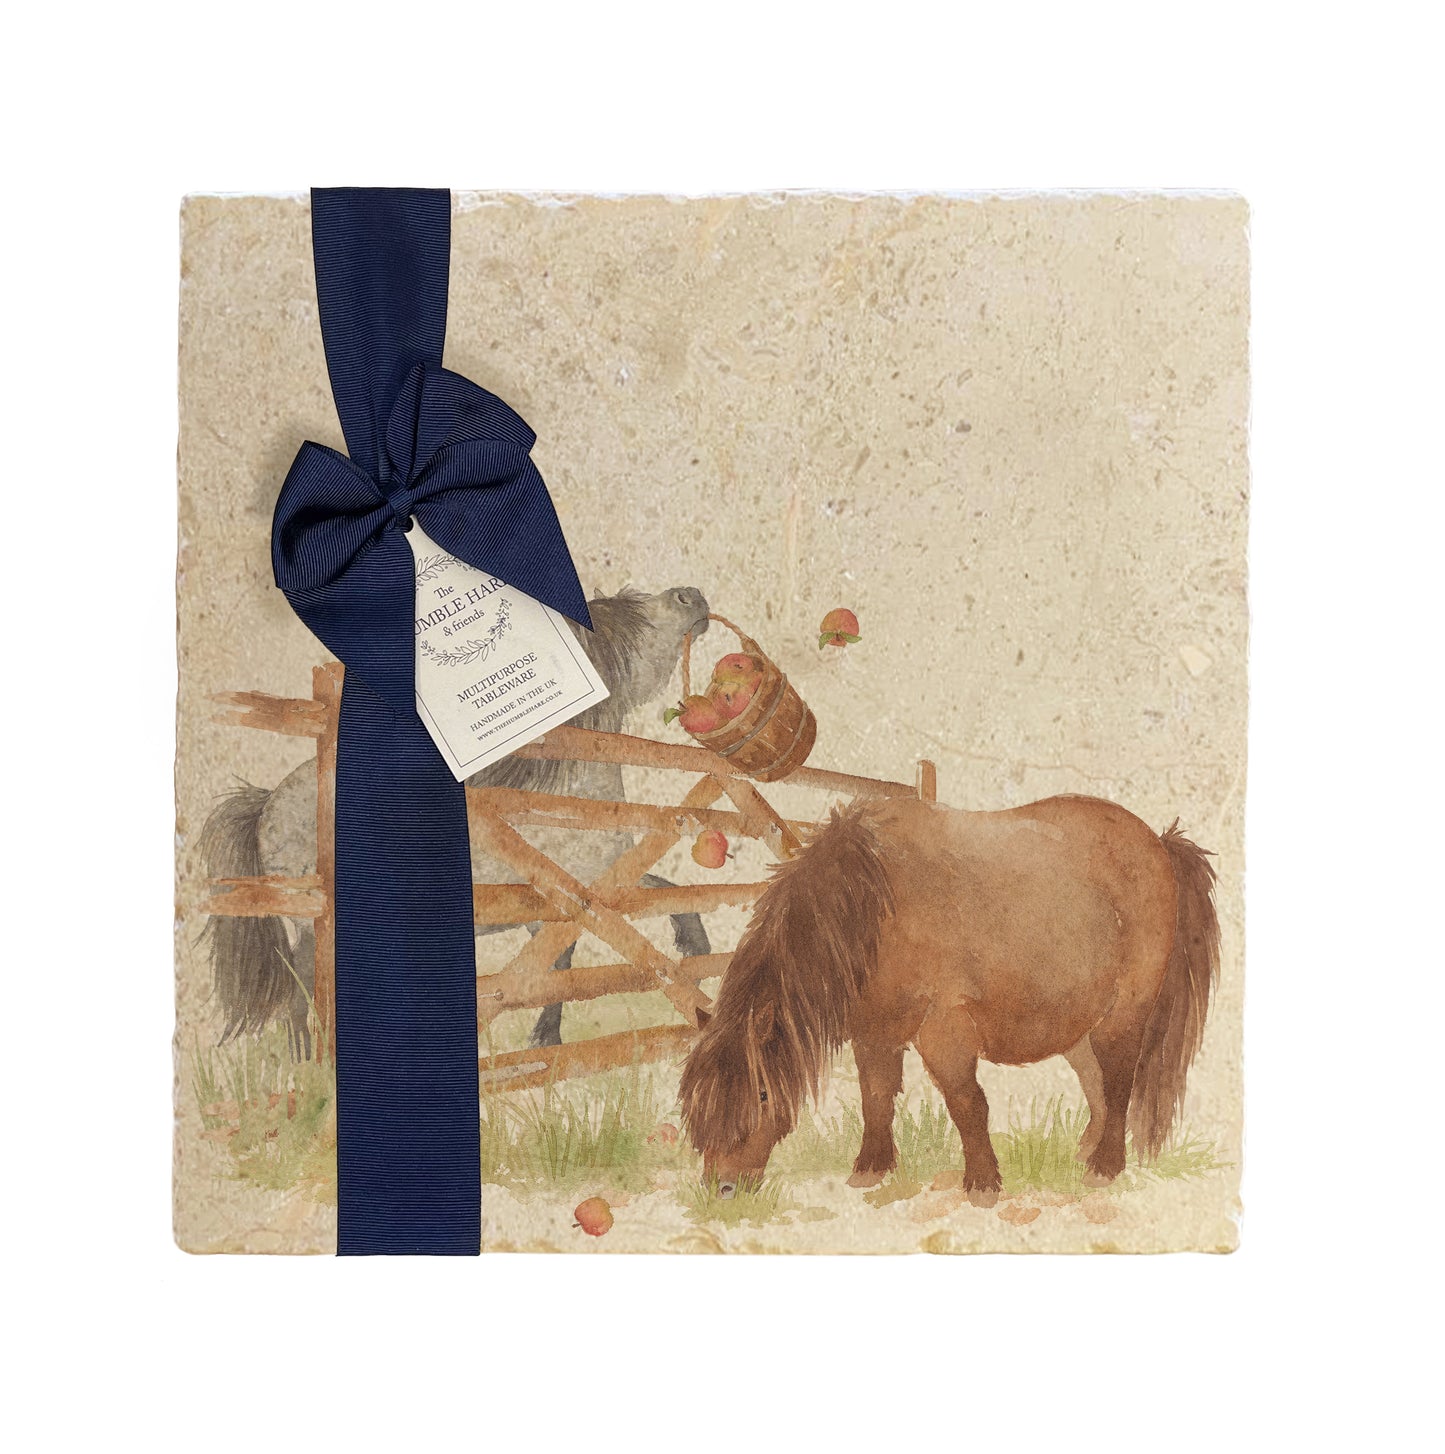 A multipurpose marble platter with a watercolour Shetland pony design, packaged with a luxurious dark blue bow and branded gift tag.